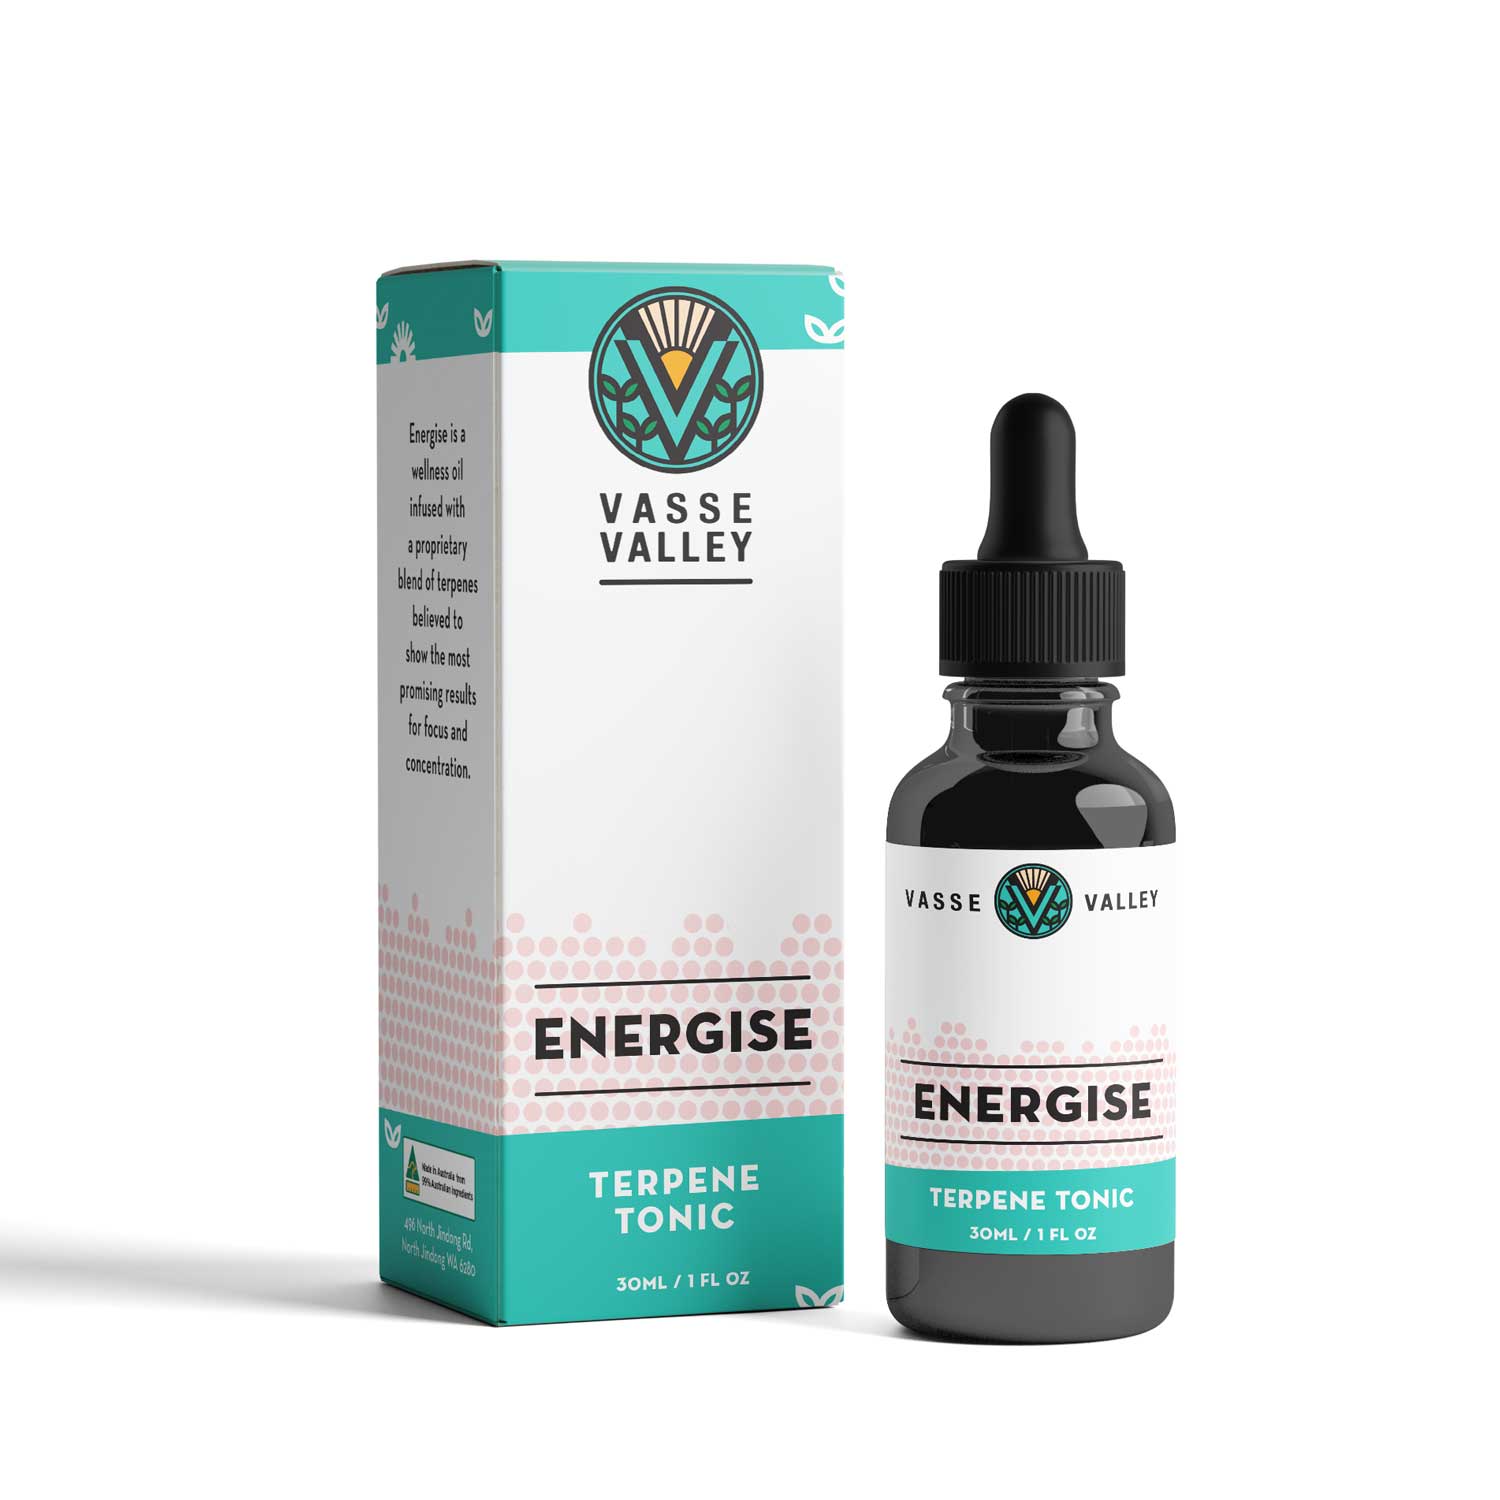 Vasse Valley Terpene Tonic Energise - 30ml bottle with dropper - focus, concentration, brain food